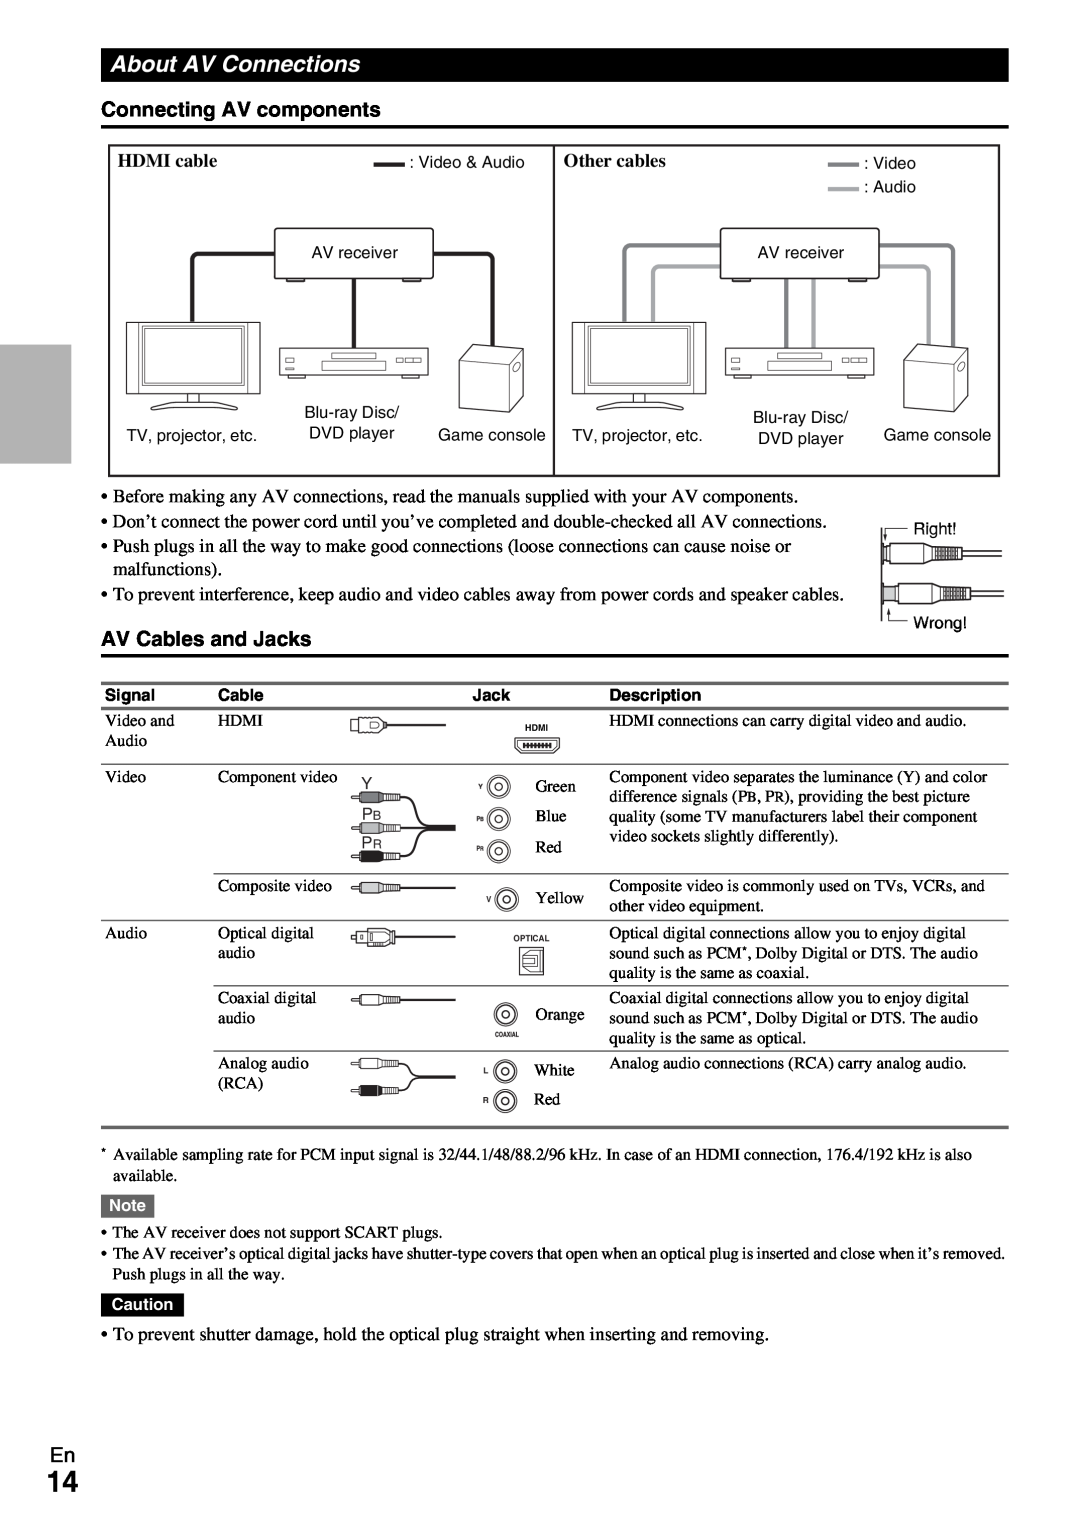 Onkyo TX-NR579 instruction manual About AV Connections, Connecting AV components, AV Cables and Jacks 